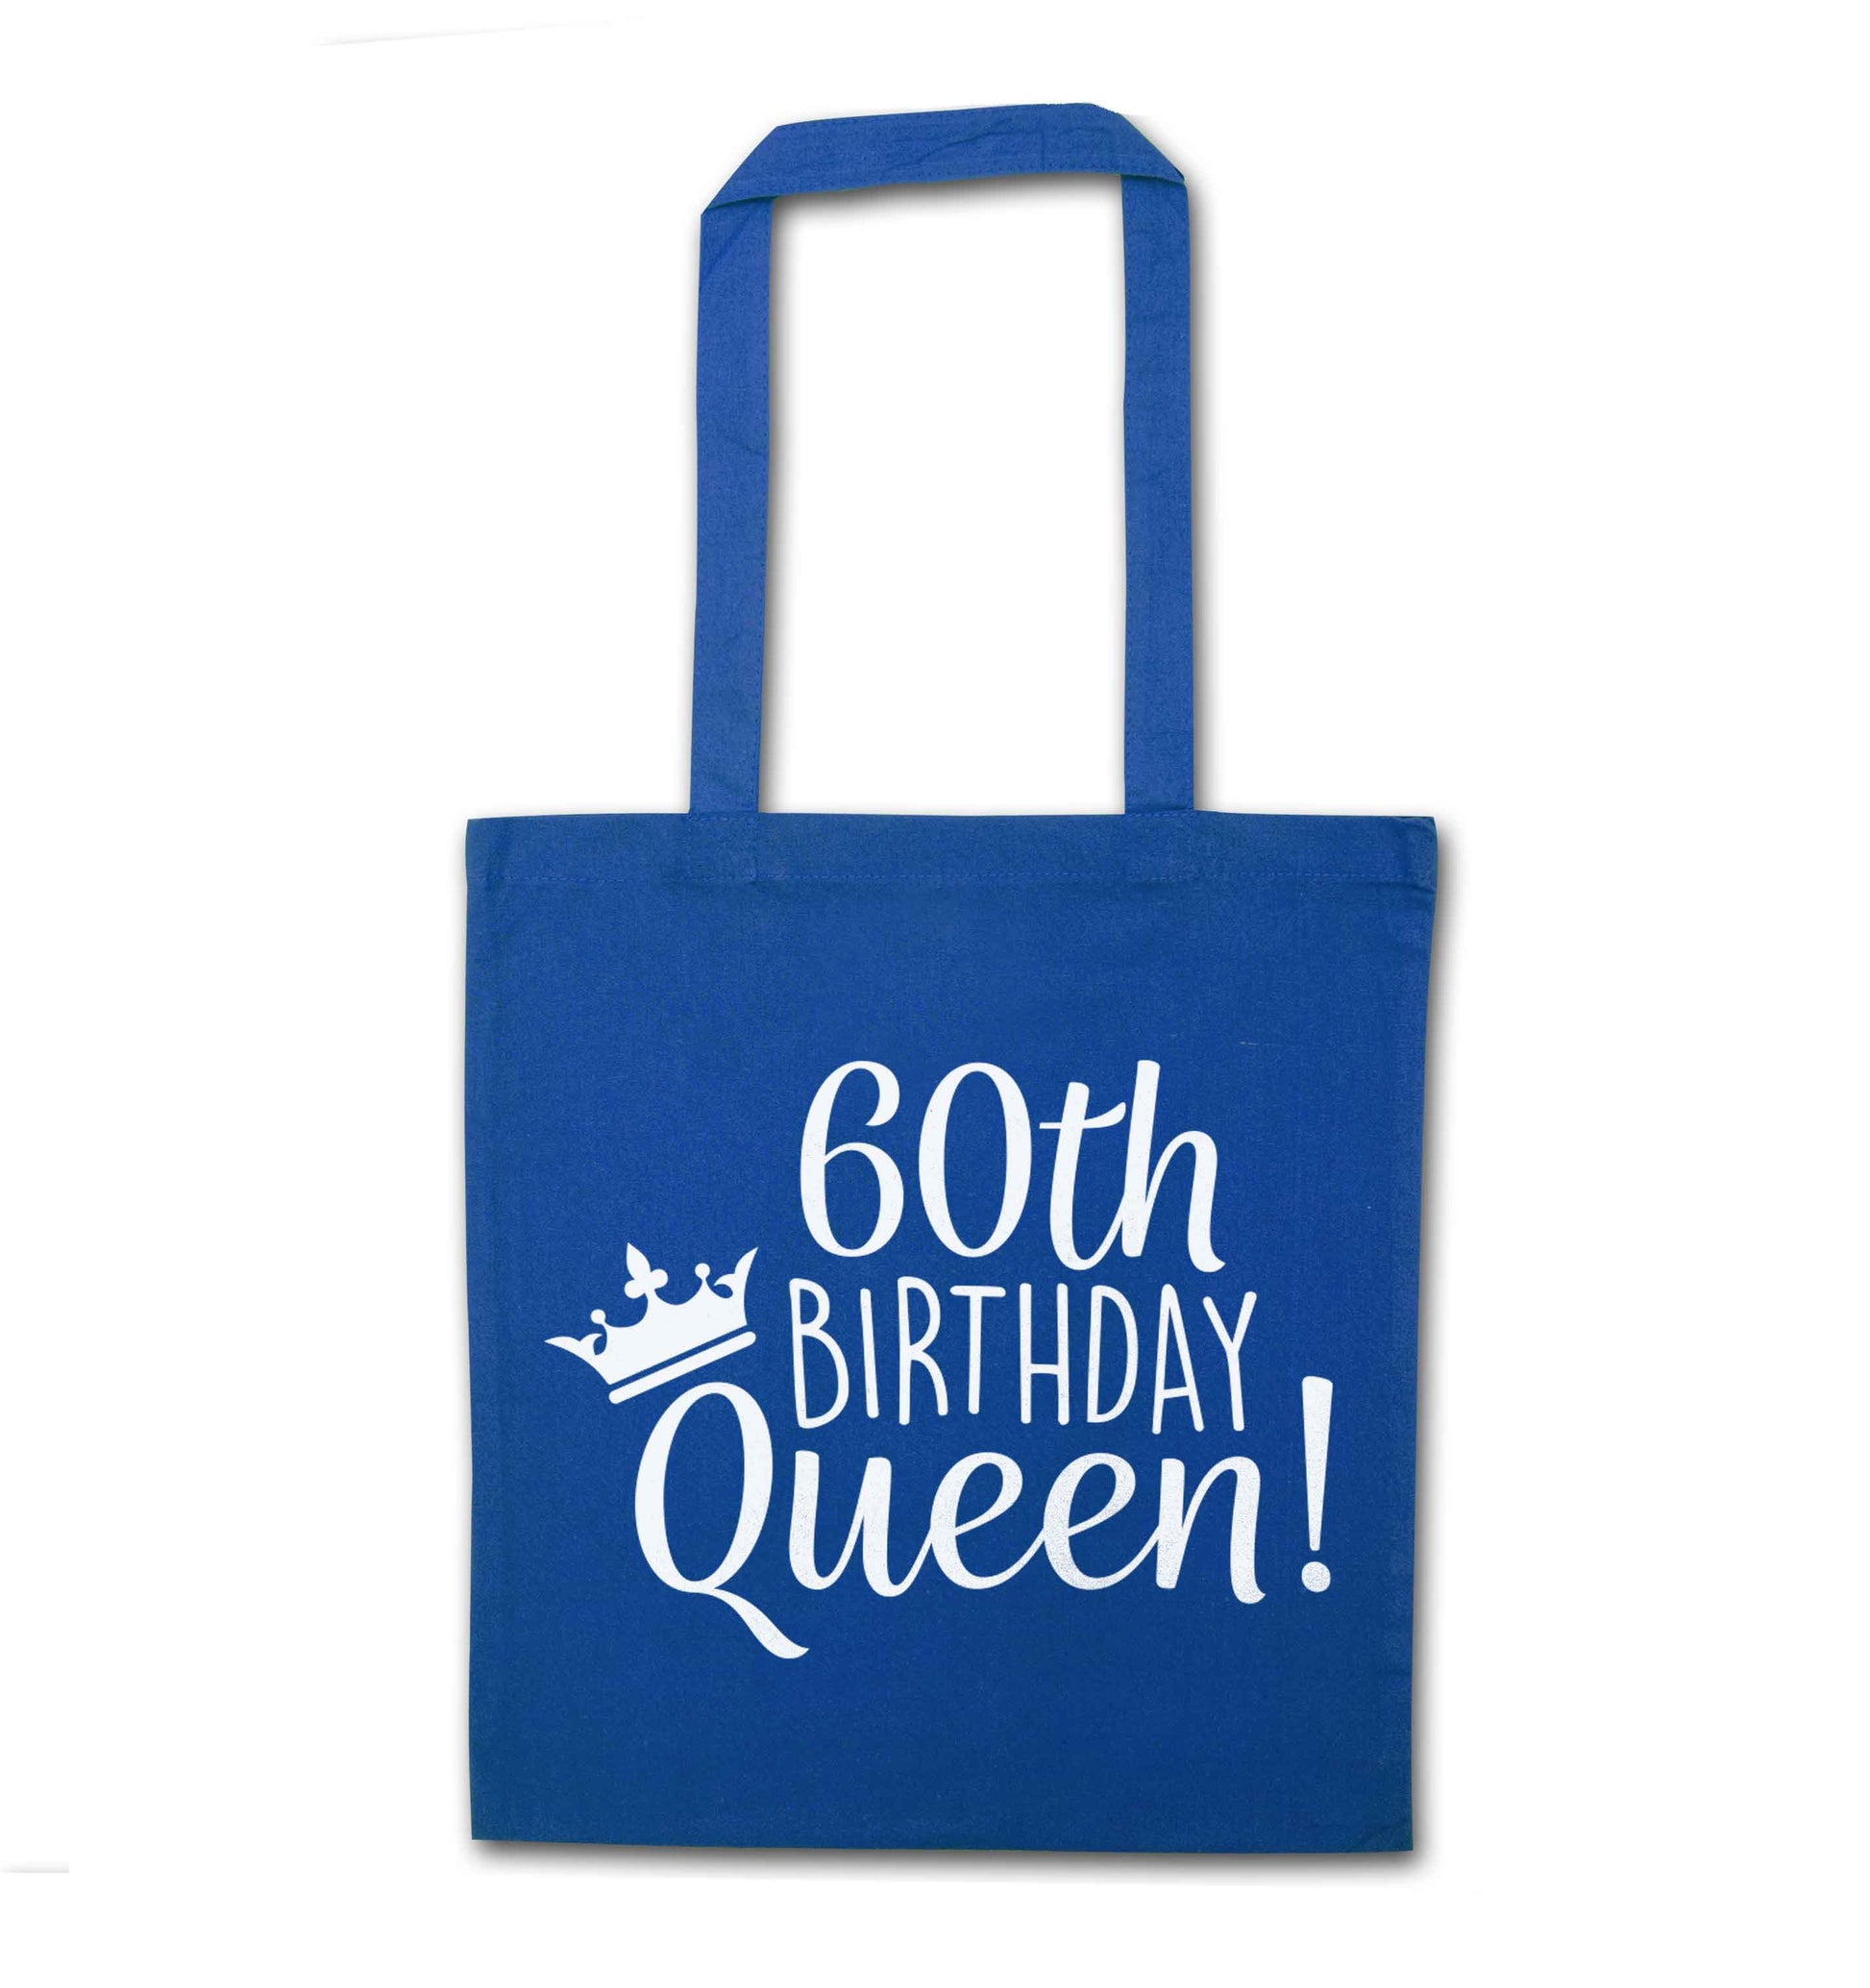 60th birthday Queen blue tote bag